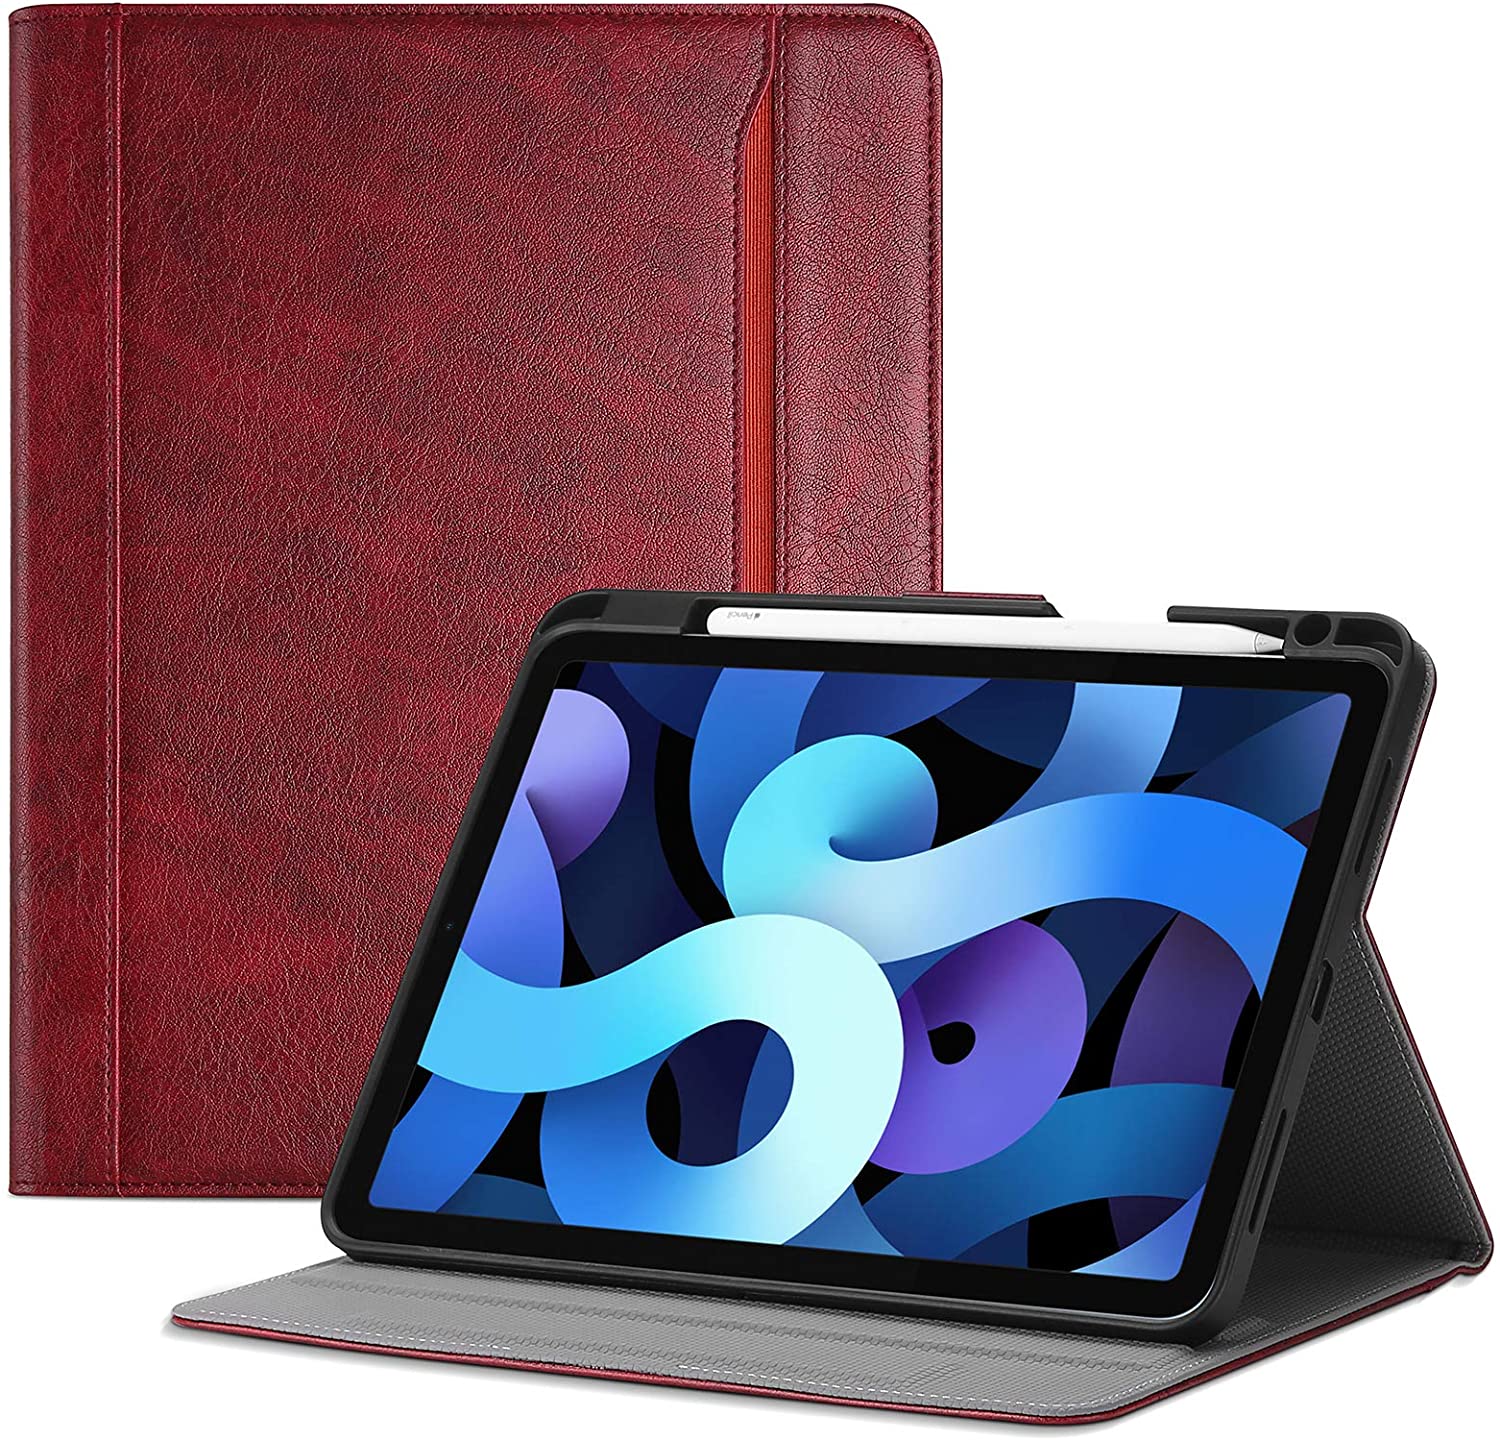 iPad Air 4 10.9 inch 2020 Generation Case with Pencil Holder | ProCase red